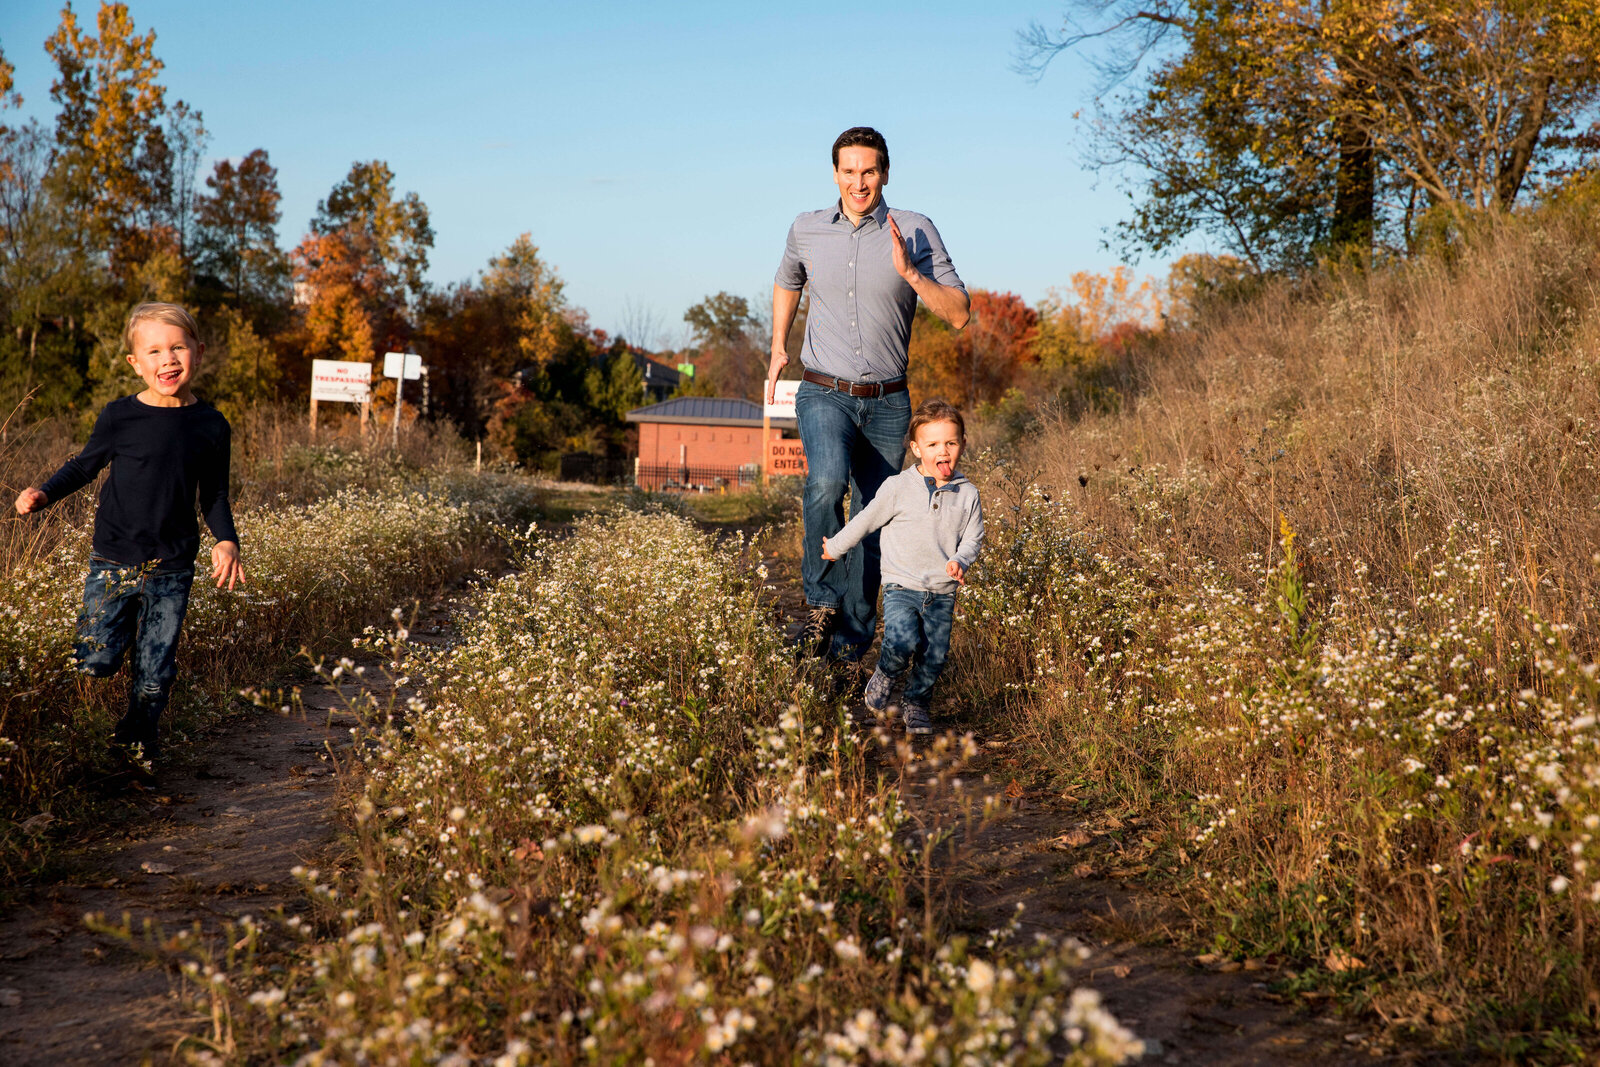 Young sons race father along conservation trail